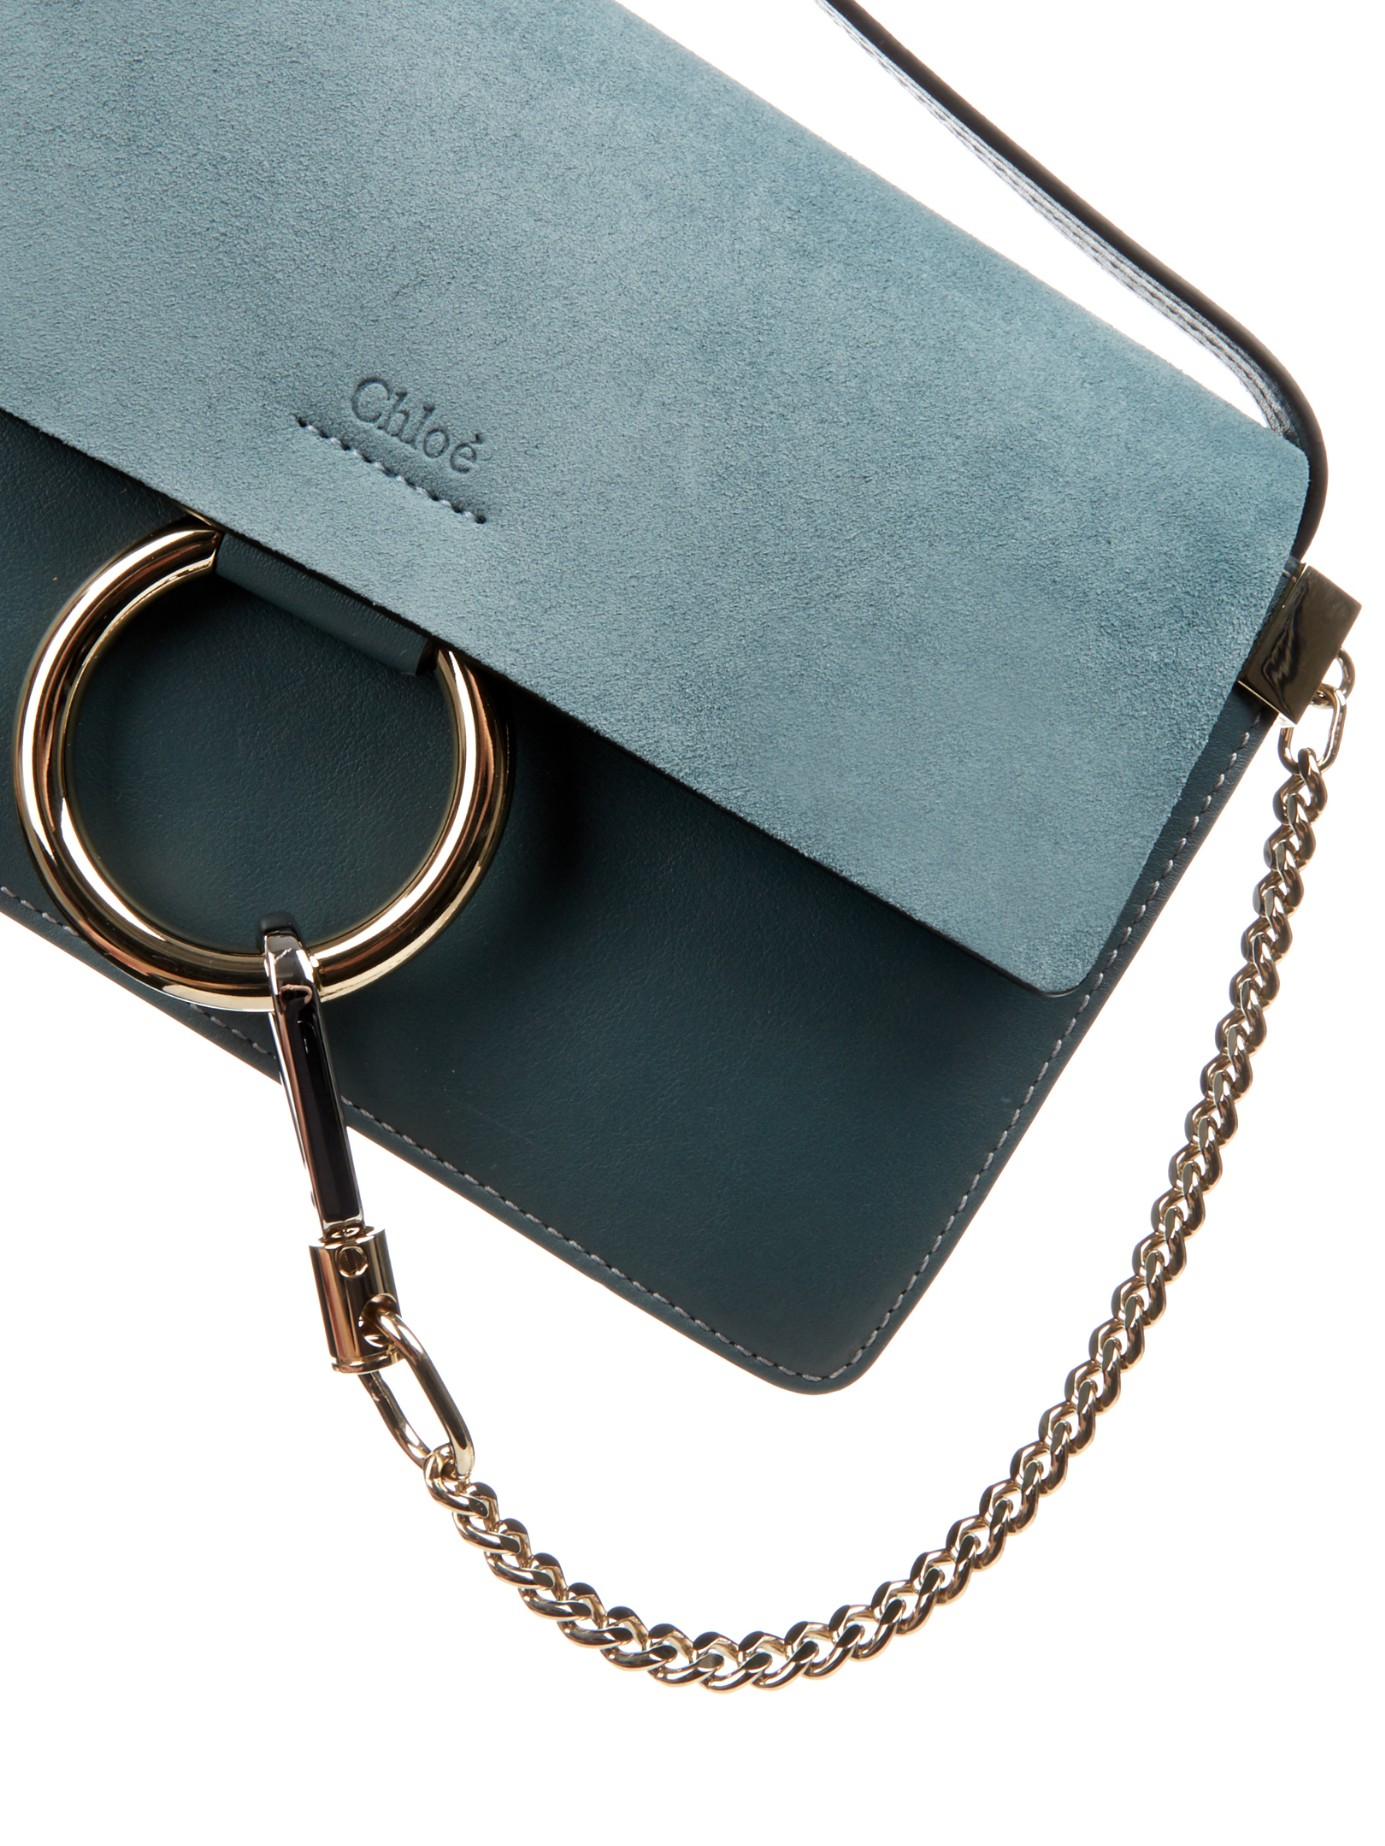 chloe bag price - Chlo Faye Leather and Suede Cross-Body Bag in Blue | Lyst